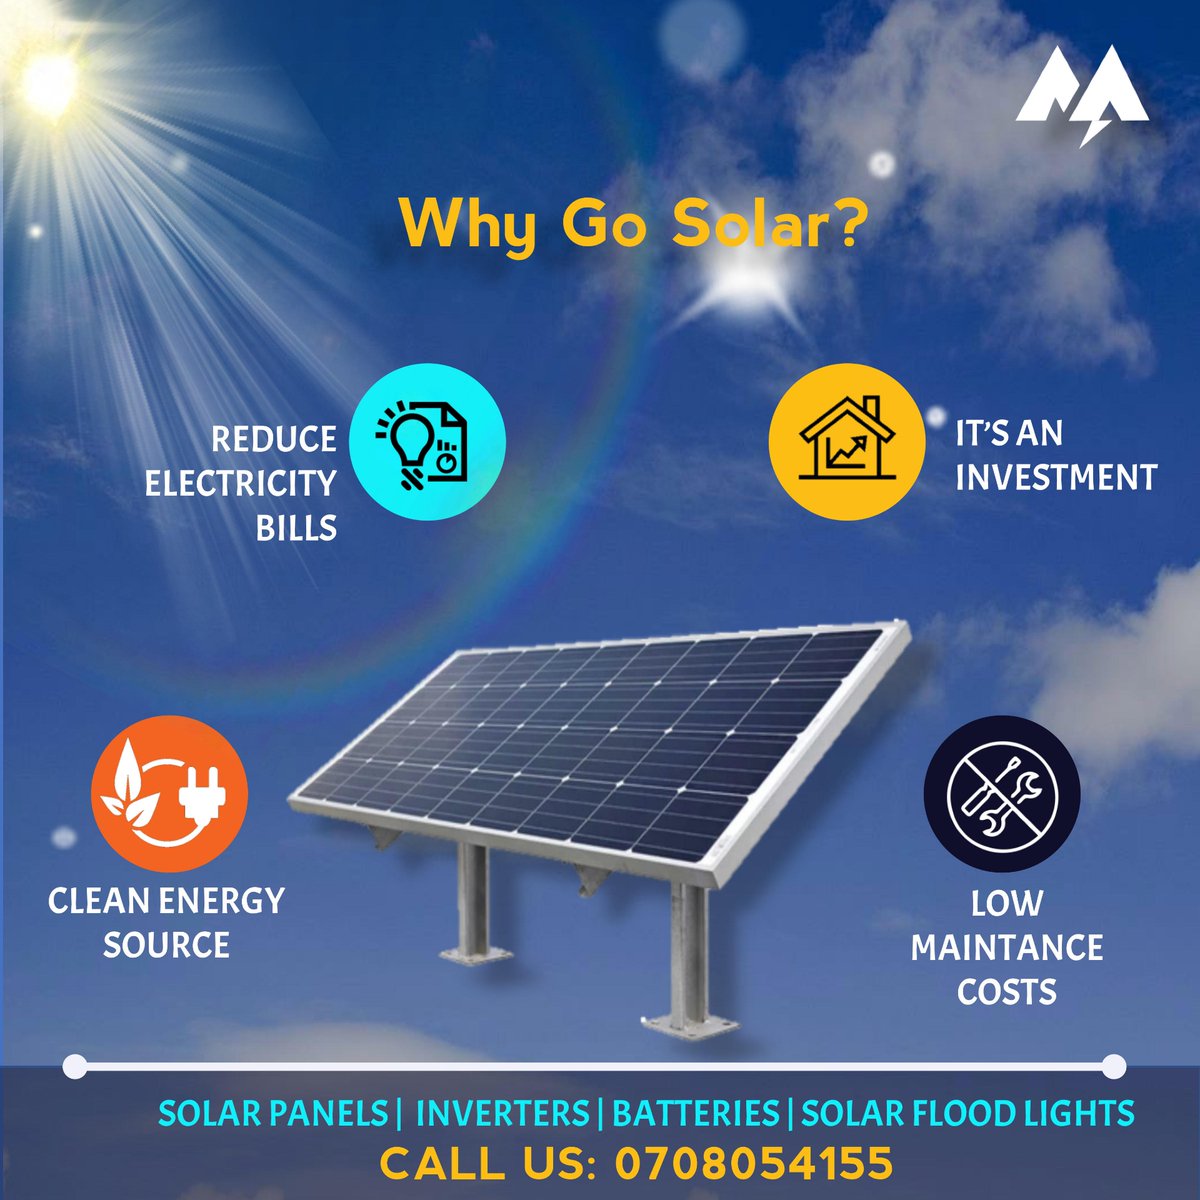 If you're a business or homeowner with fluctuating cash flow, going solar also helps you better forecast and manage your expenses #SwitchToSolar with #megatricity .#solarenergy #Besmart #Bestsolarcompany #Electricitybills #Energyefficiency #Energystorage #Gogreen #Gosolar